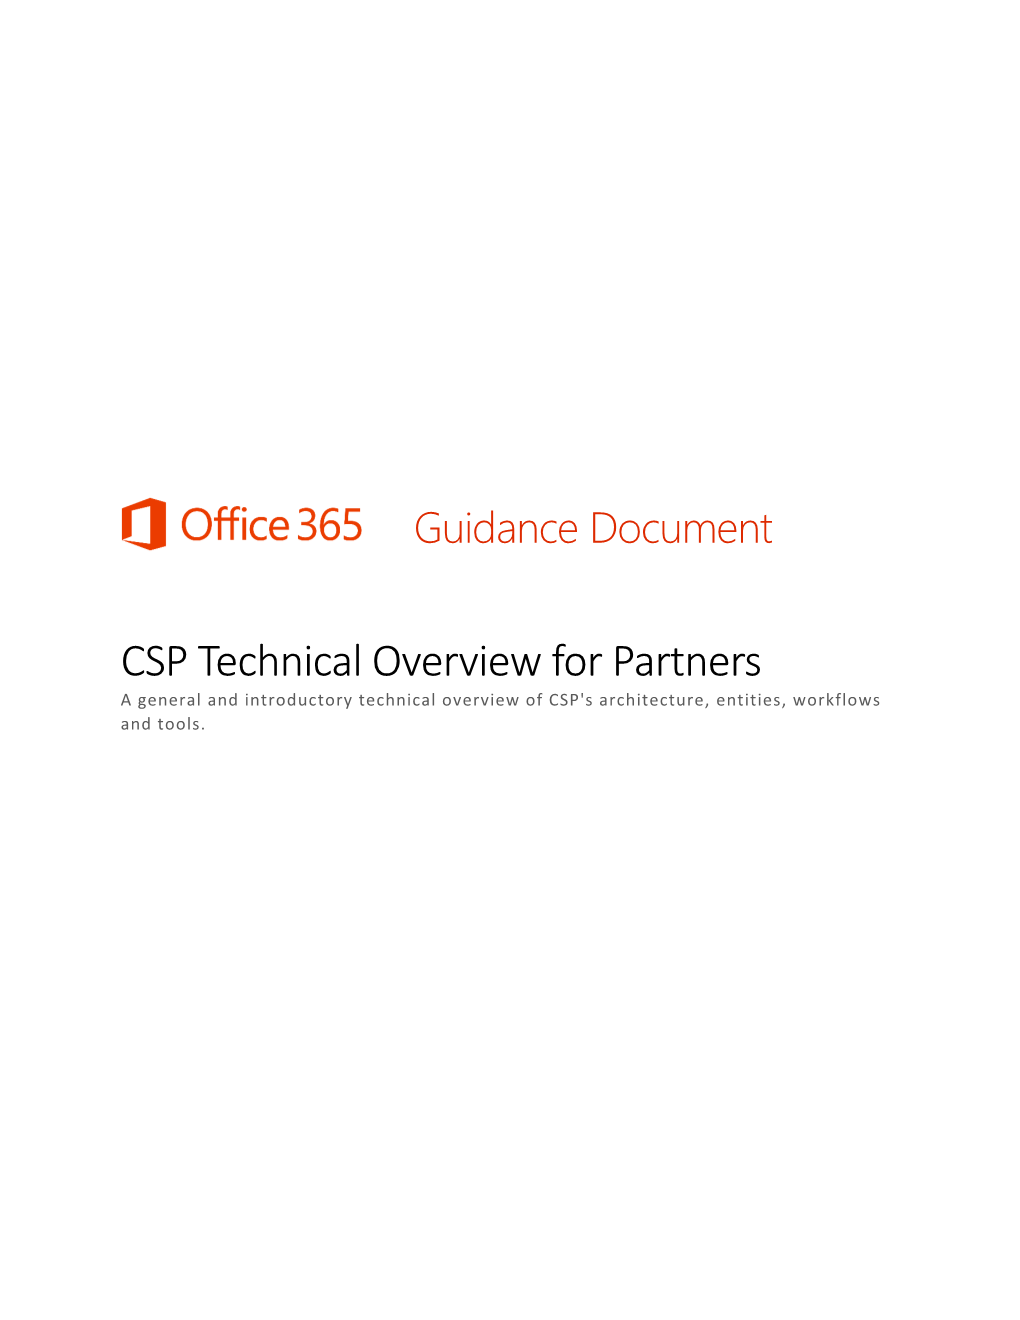 CSP Technical Overview for Partners a General and Introductory Technical Overview of CSP's Architecture, Entities, Workflows and Tools